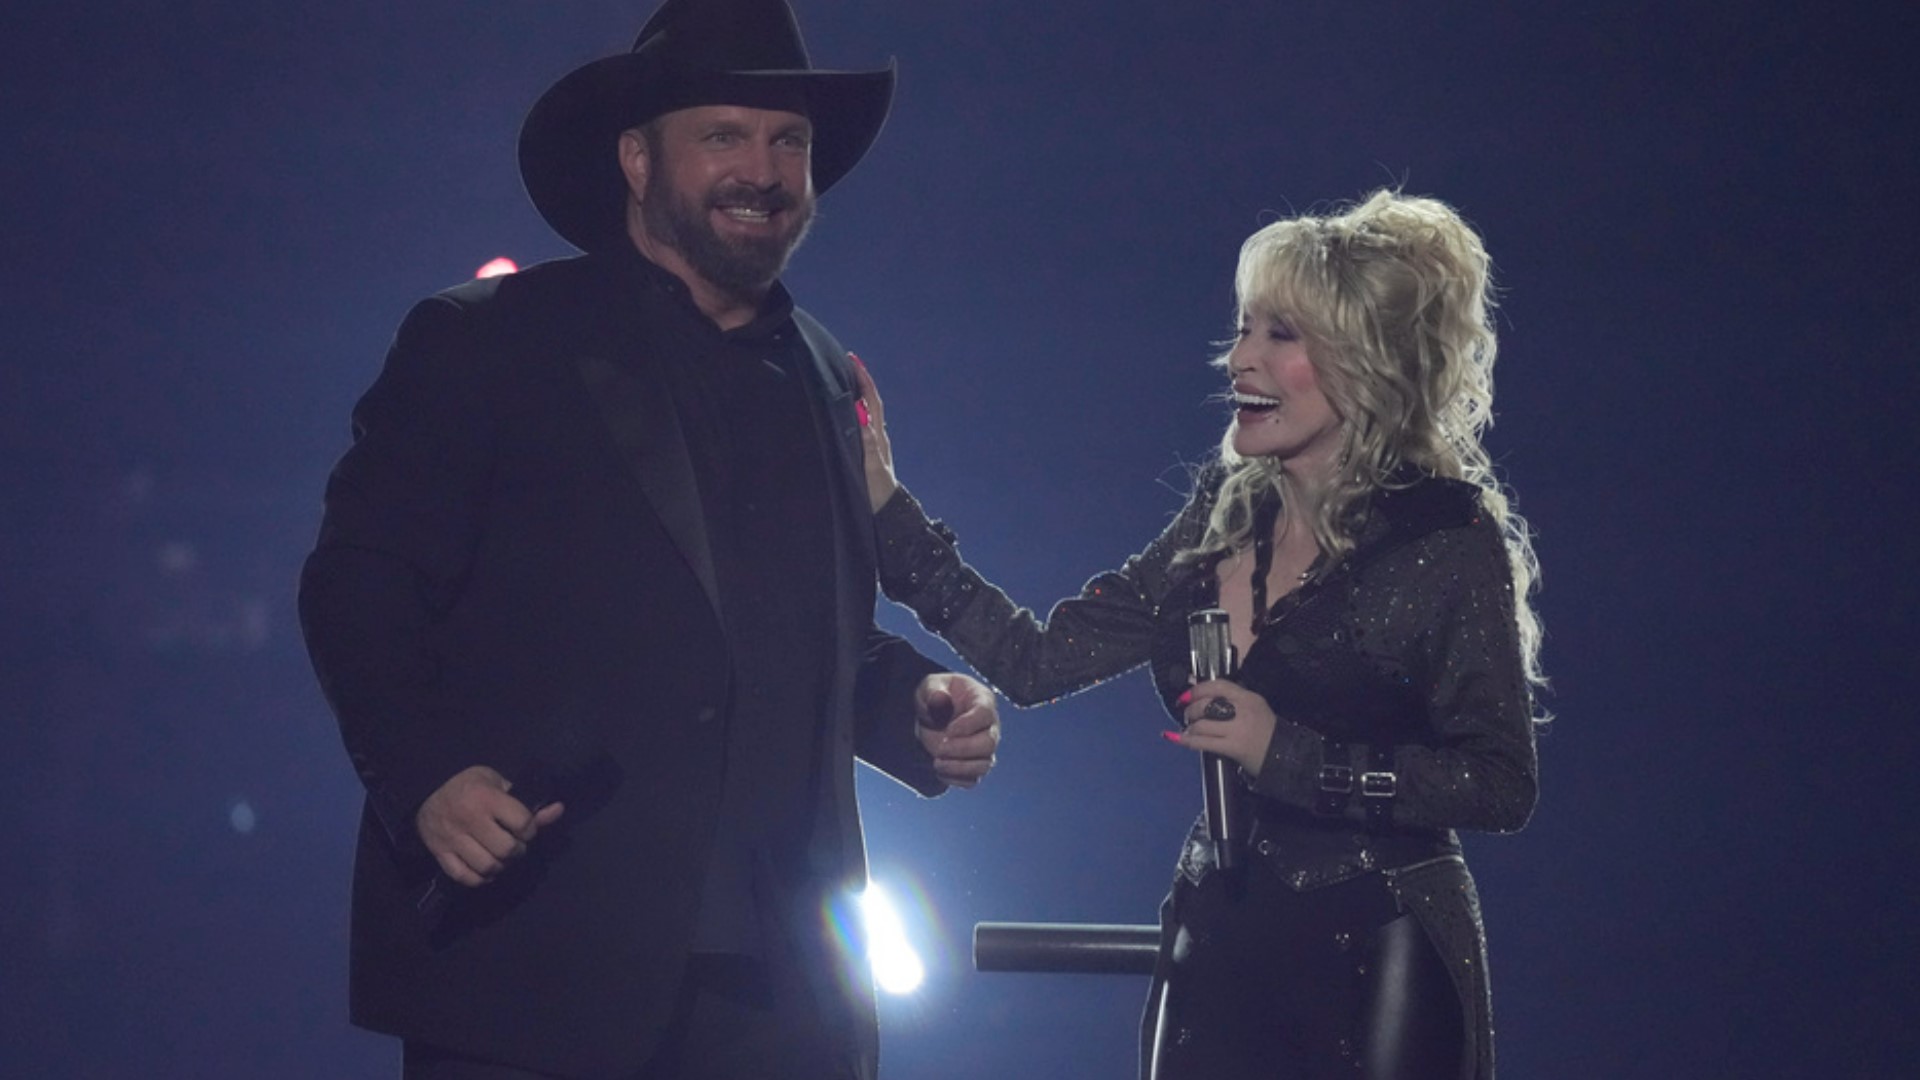 ACM Awards sets 2024 date for Frisco show at The Star